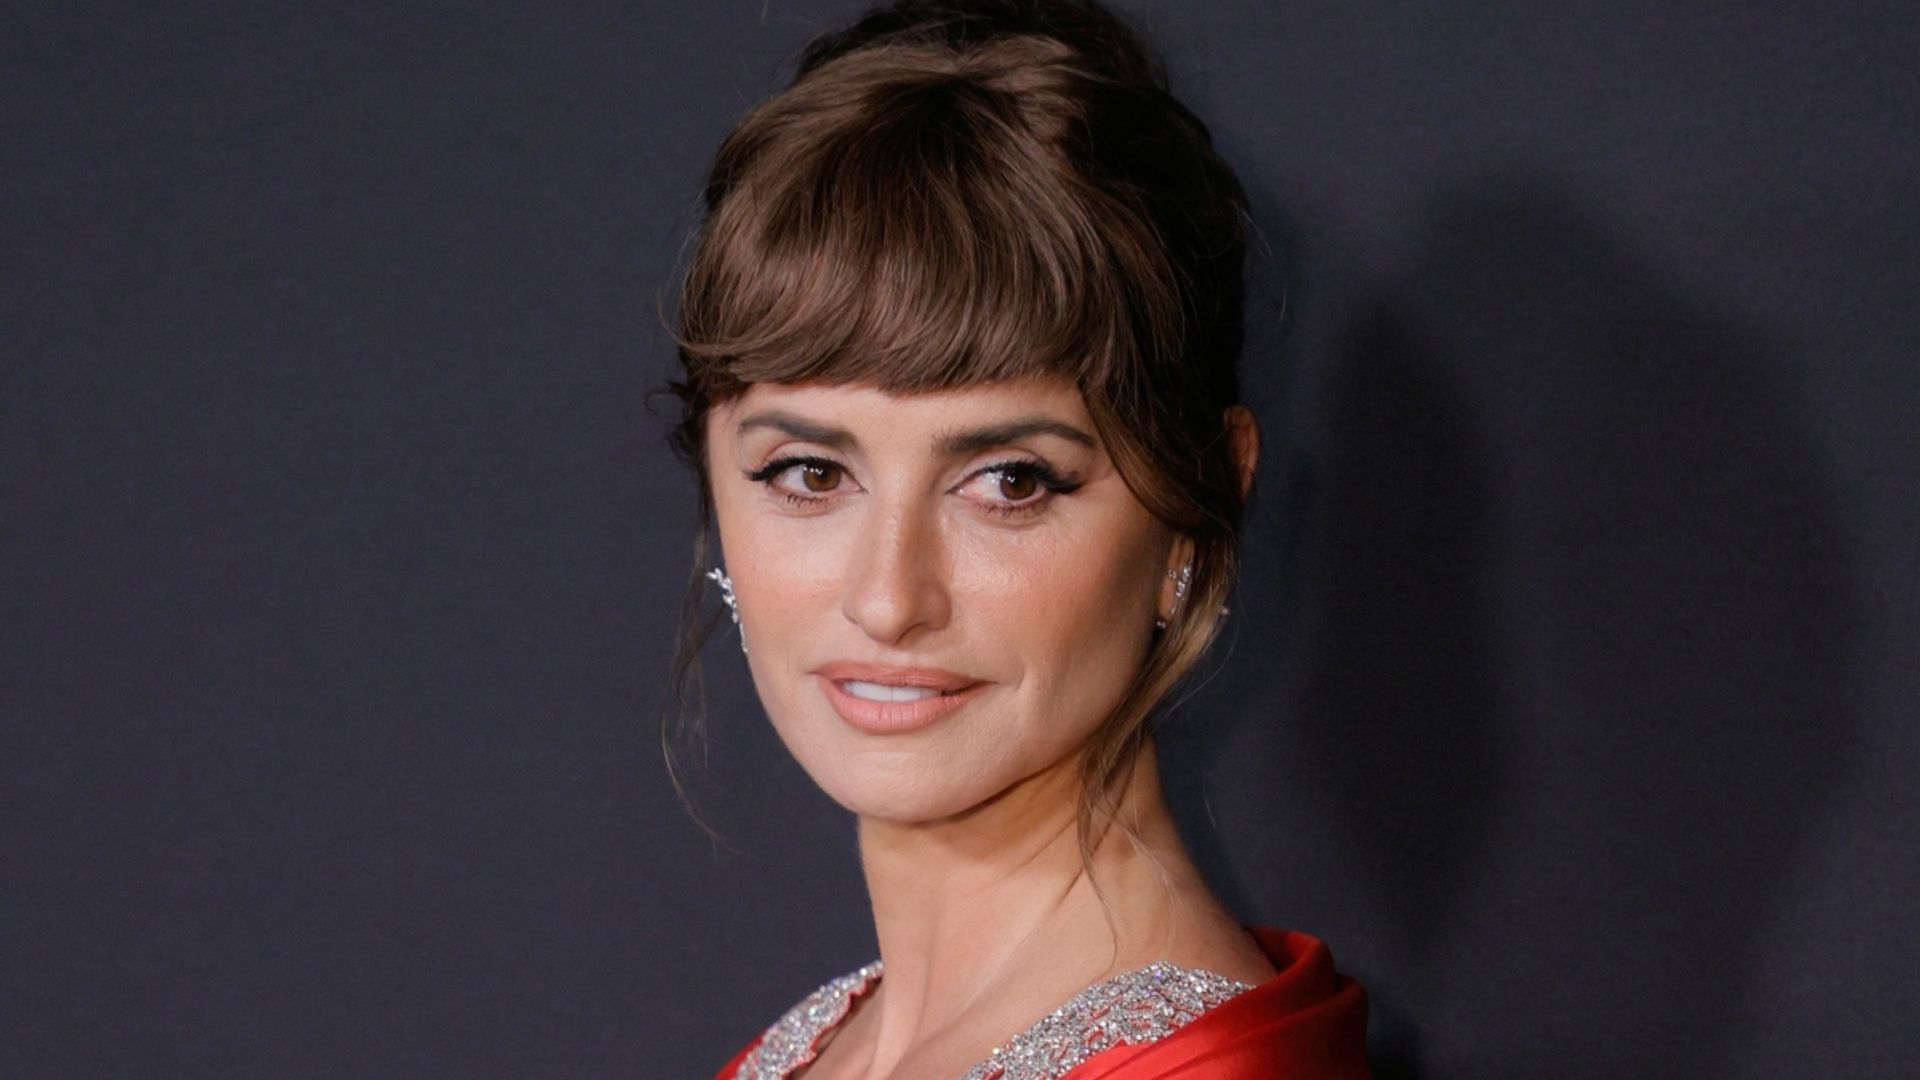 Penelope Cruz channels punk glamor posing in a t-shirt in riveting new photograph